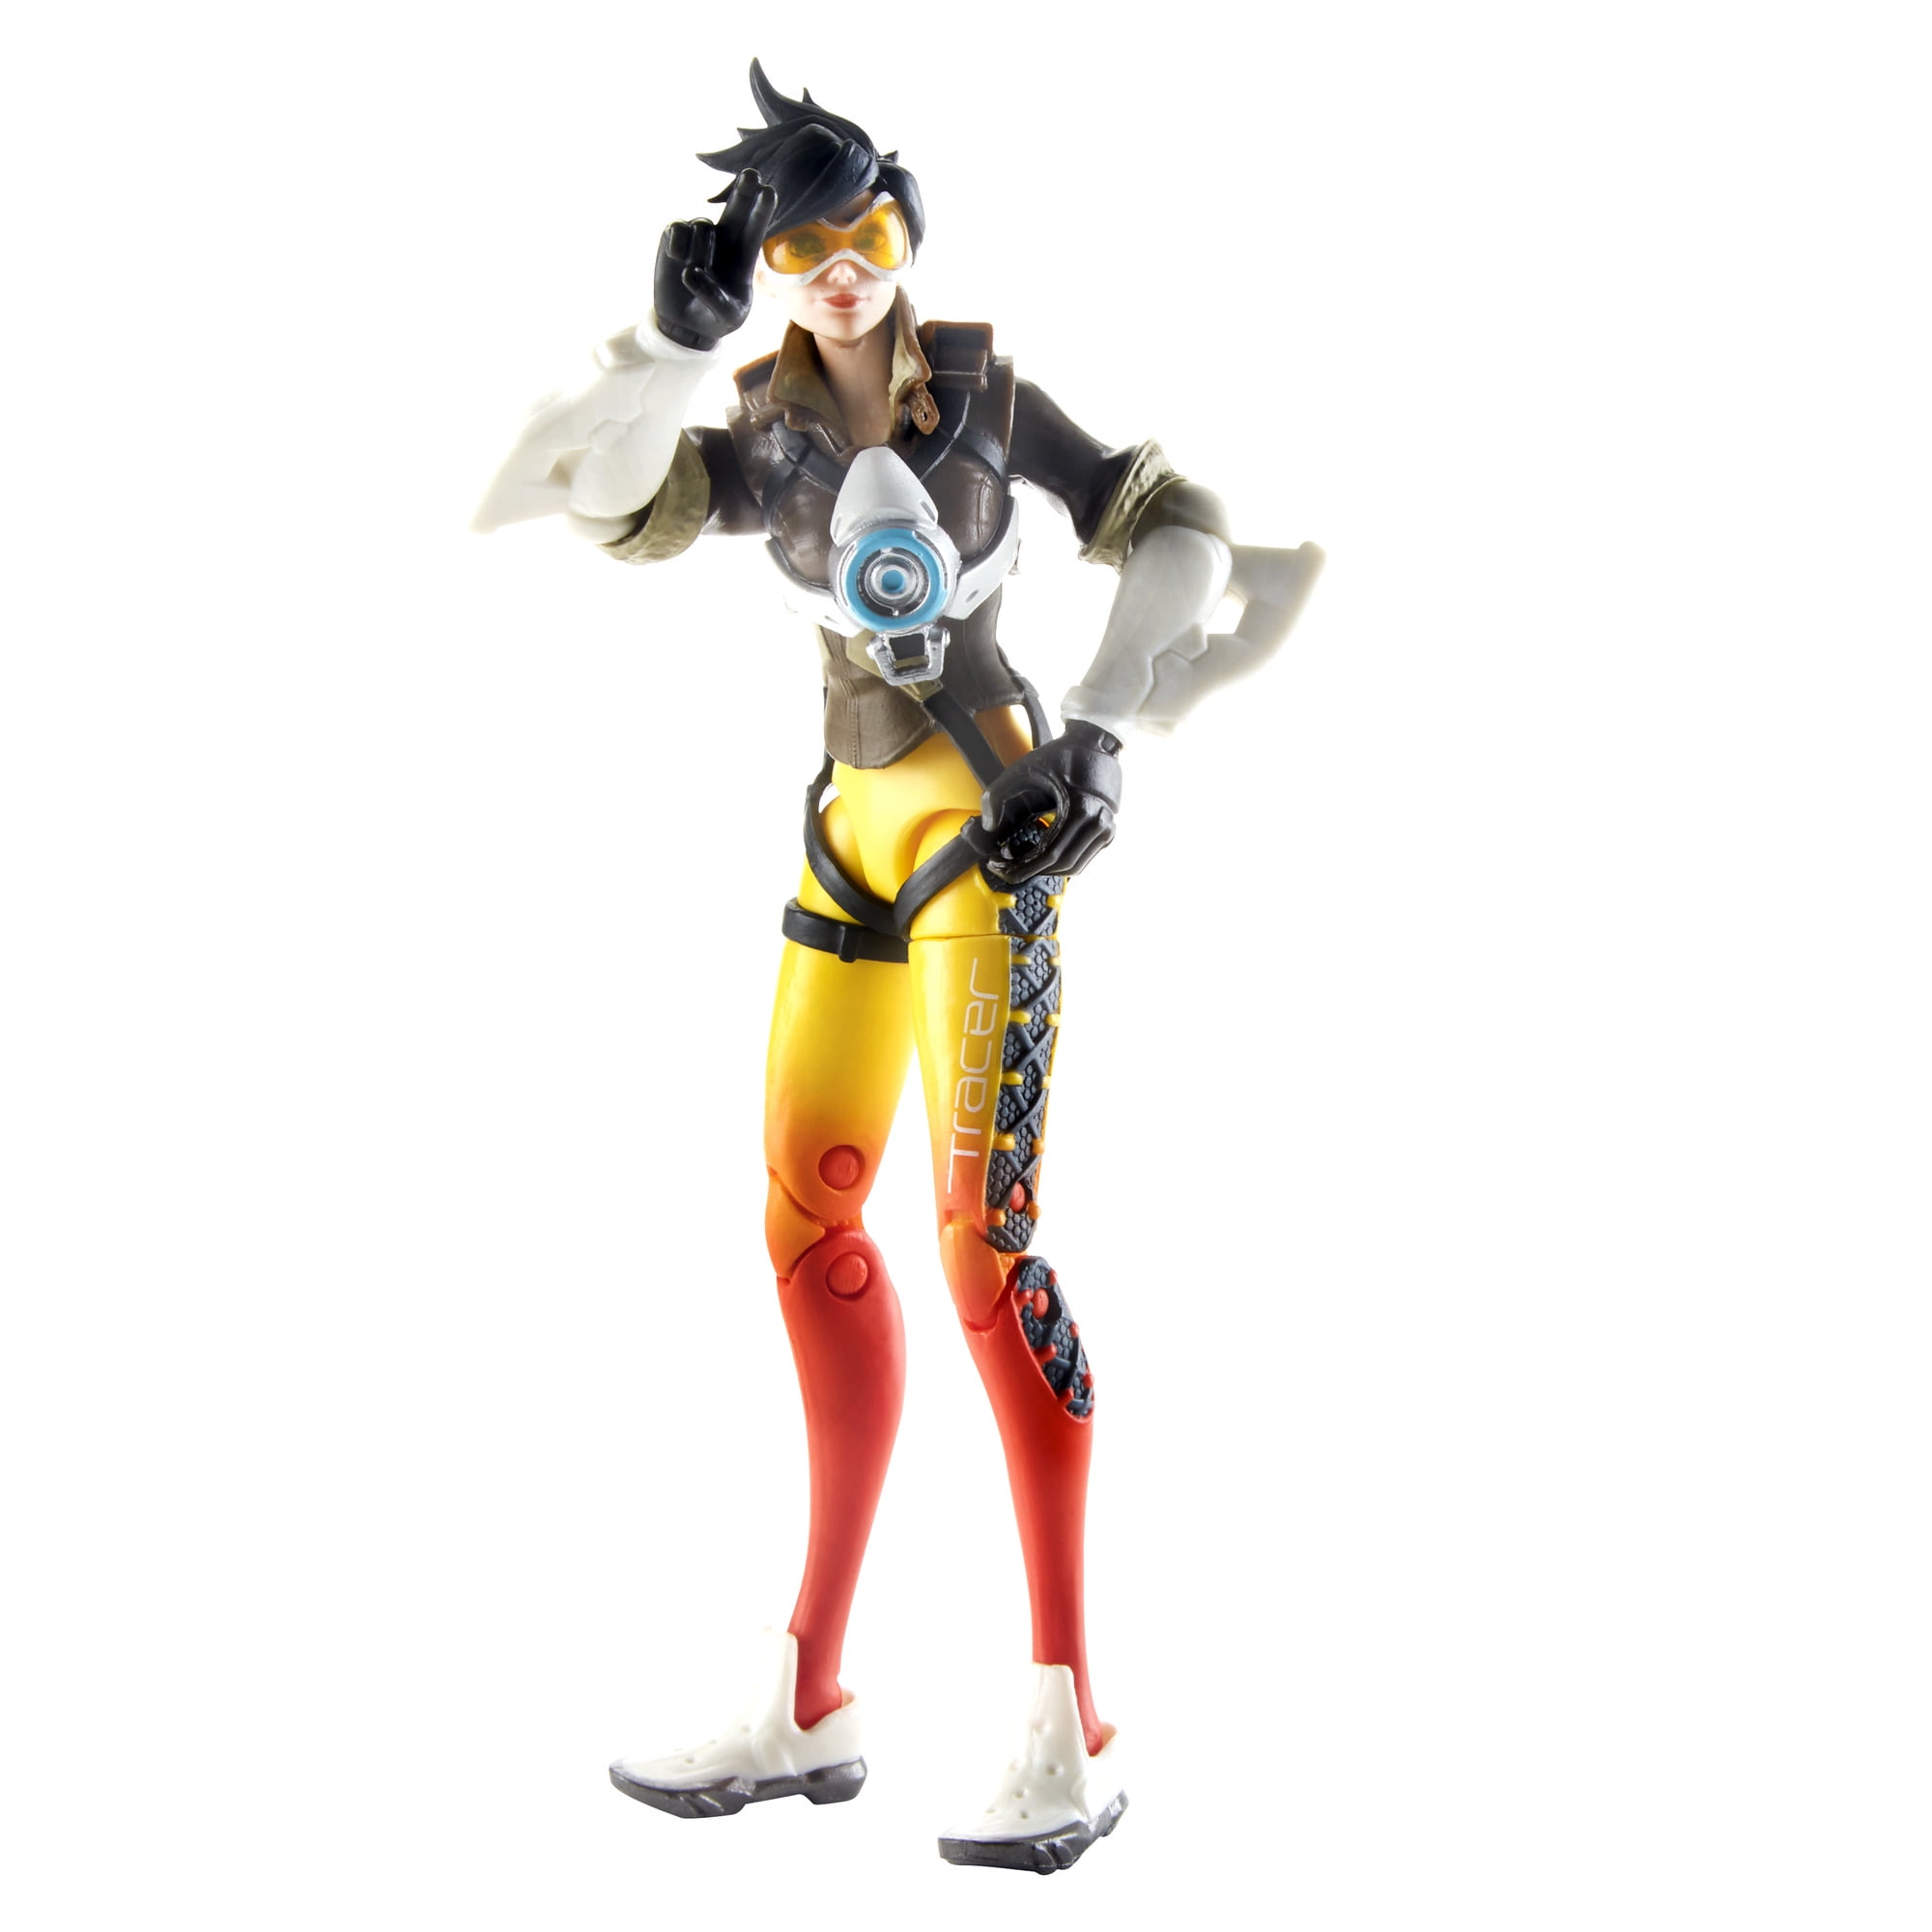 Overwatch Ultimates Tracer 6 Inch Action Figure, 1 Unit - Ralphs